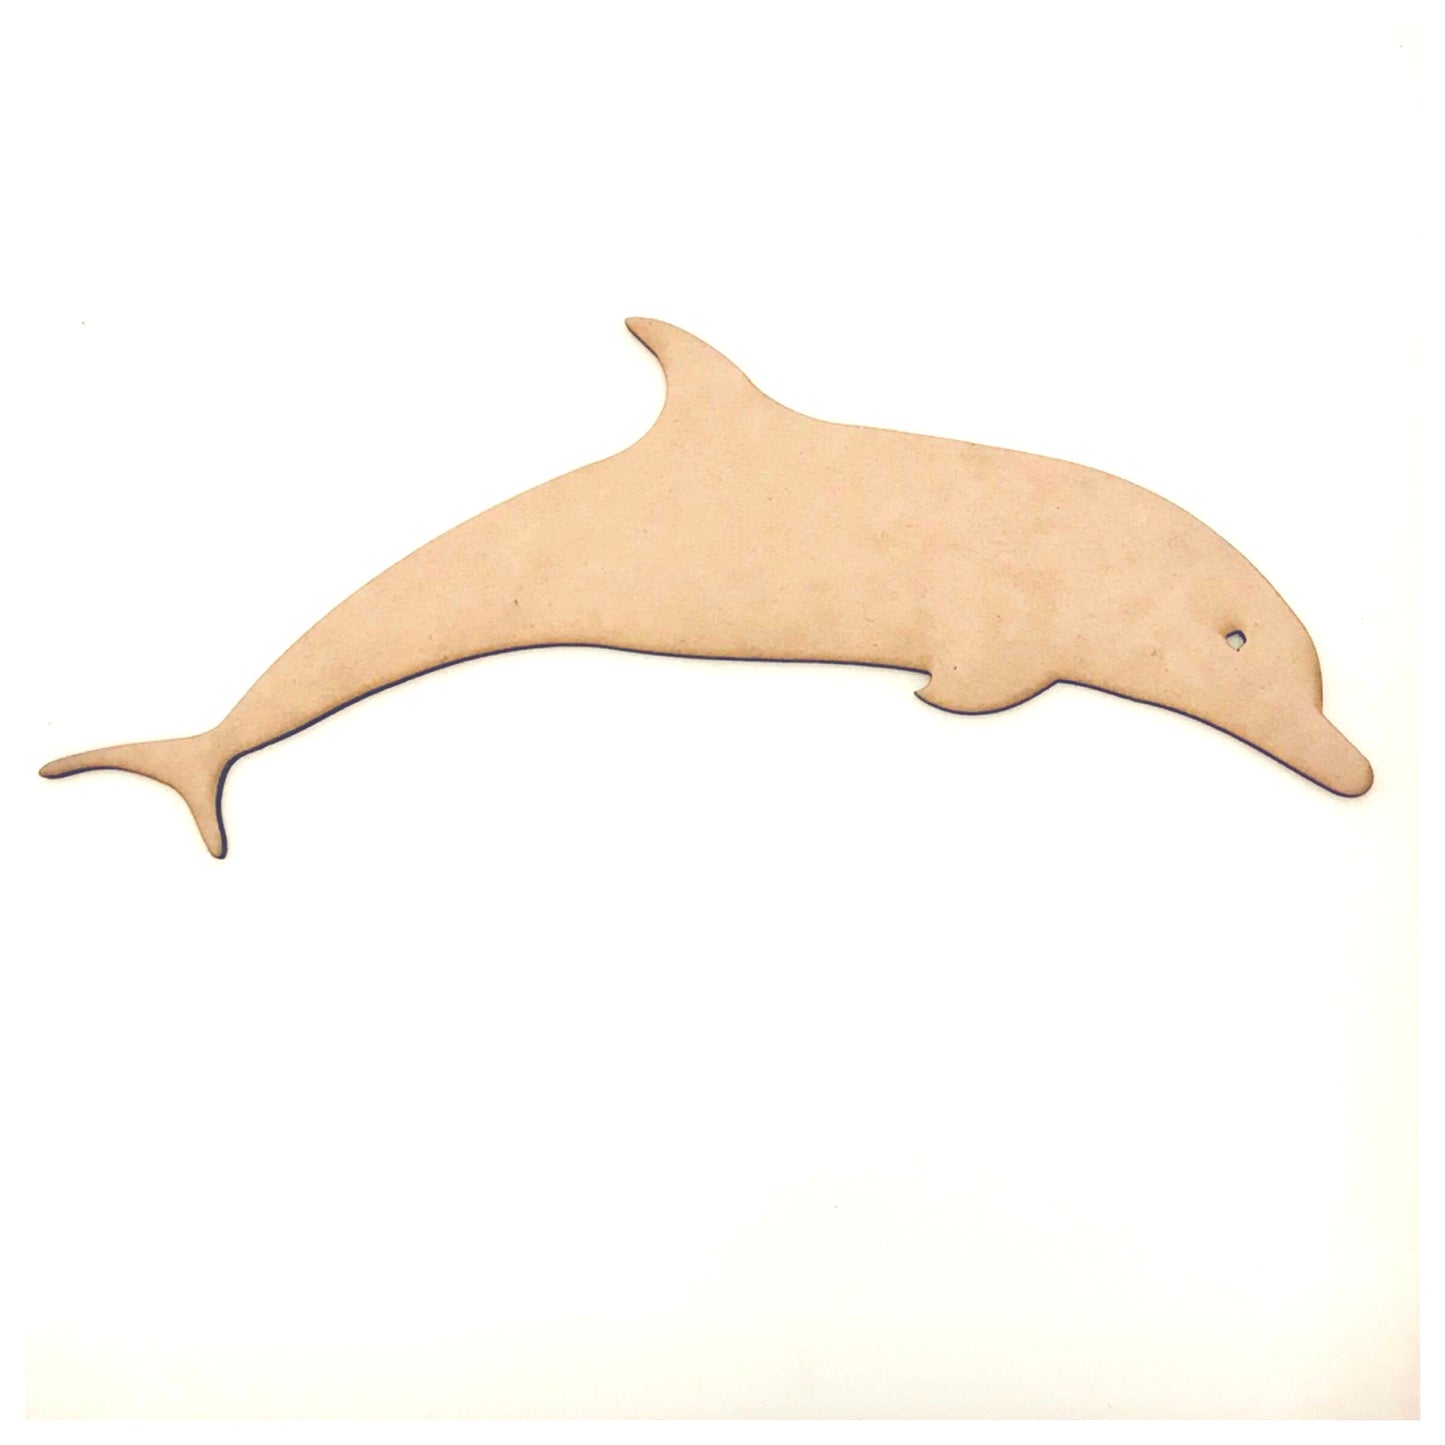 Dolphin Beach House Wooden Raw MDF DIY Craft - The Renmy Store Homewares & Gifts 